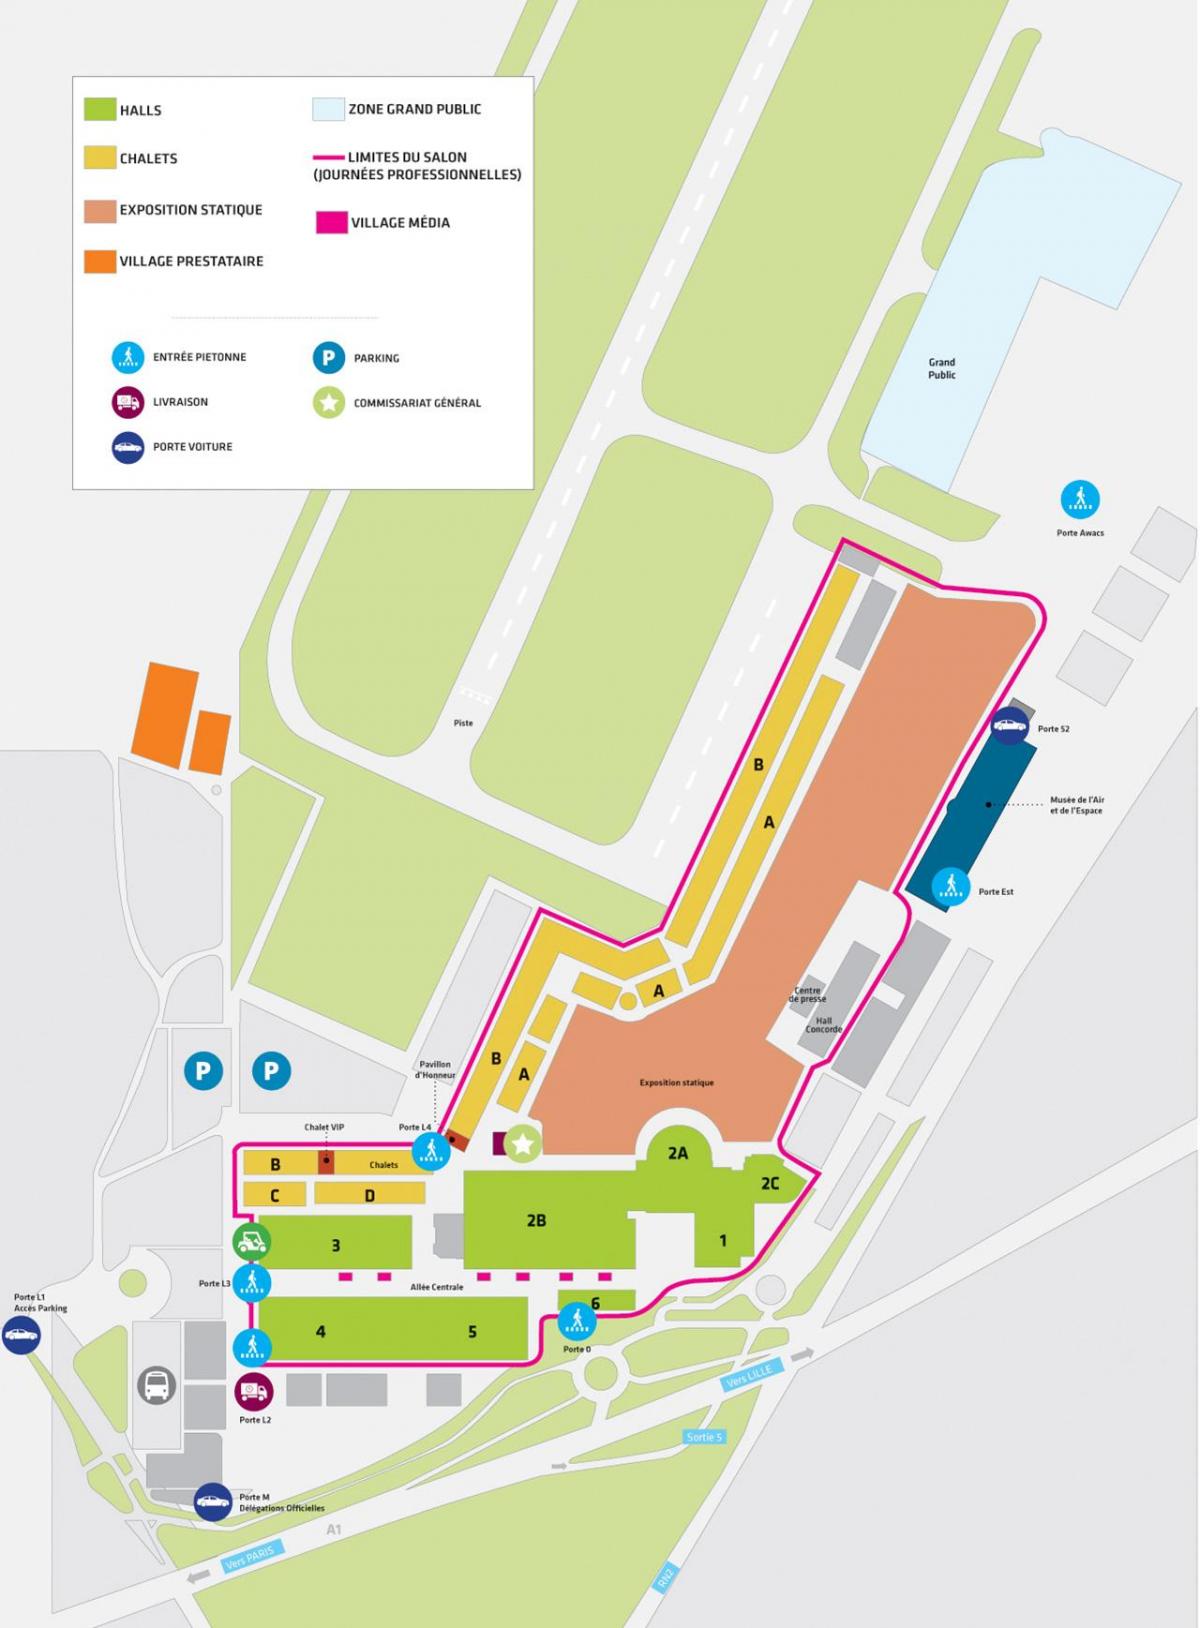 Map of Paris expo Le Bourget